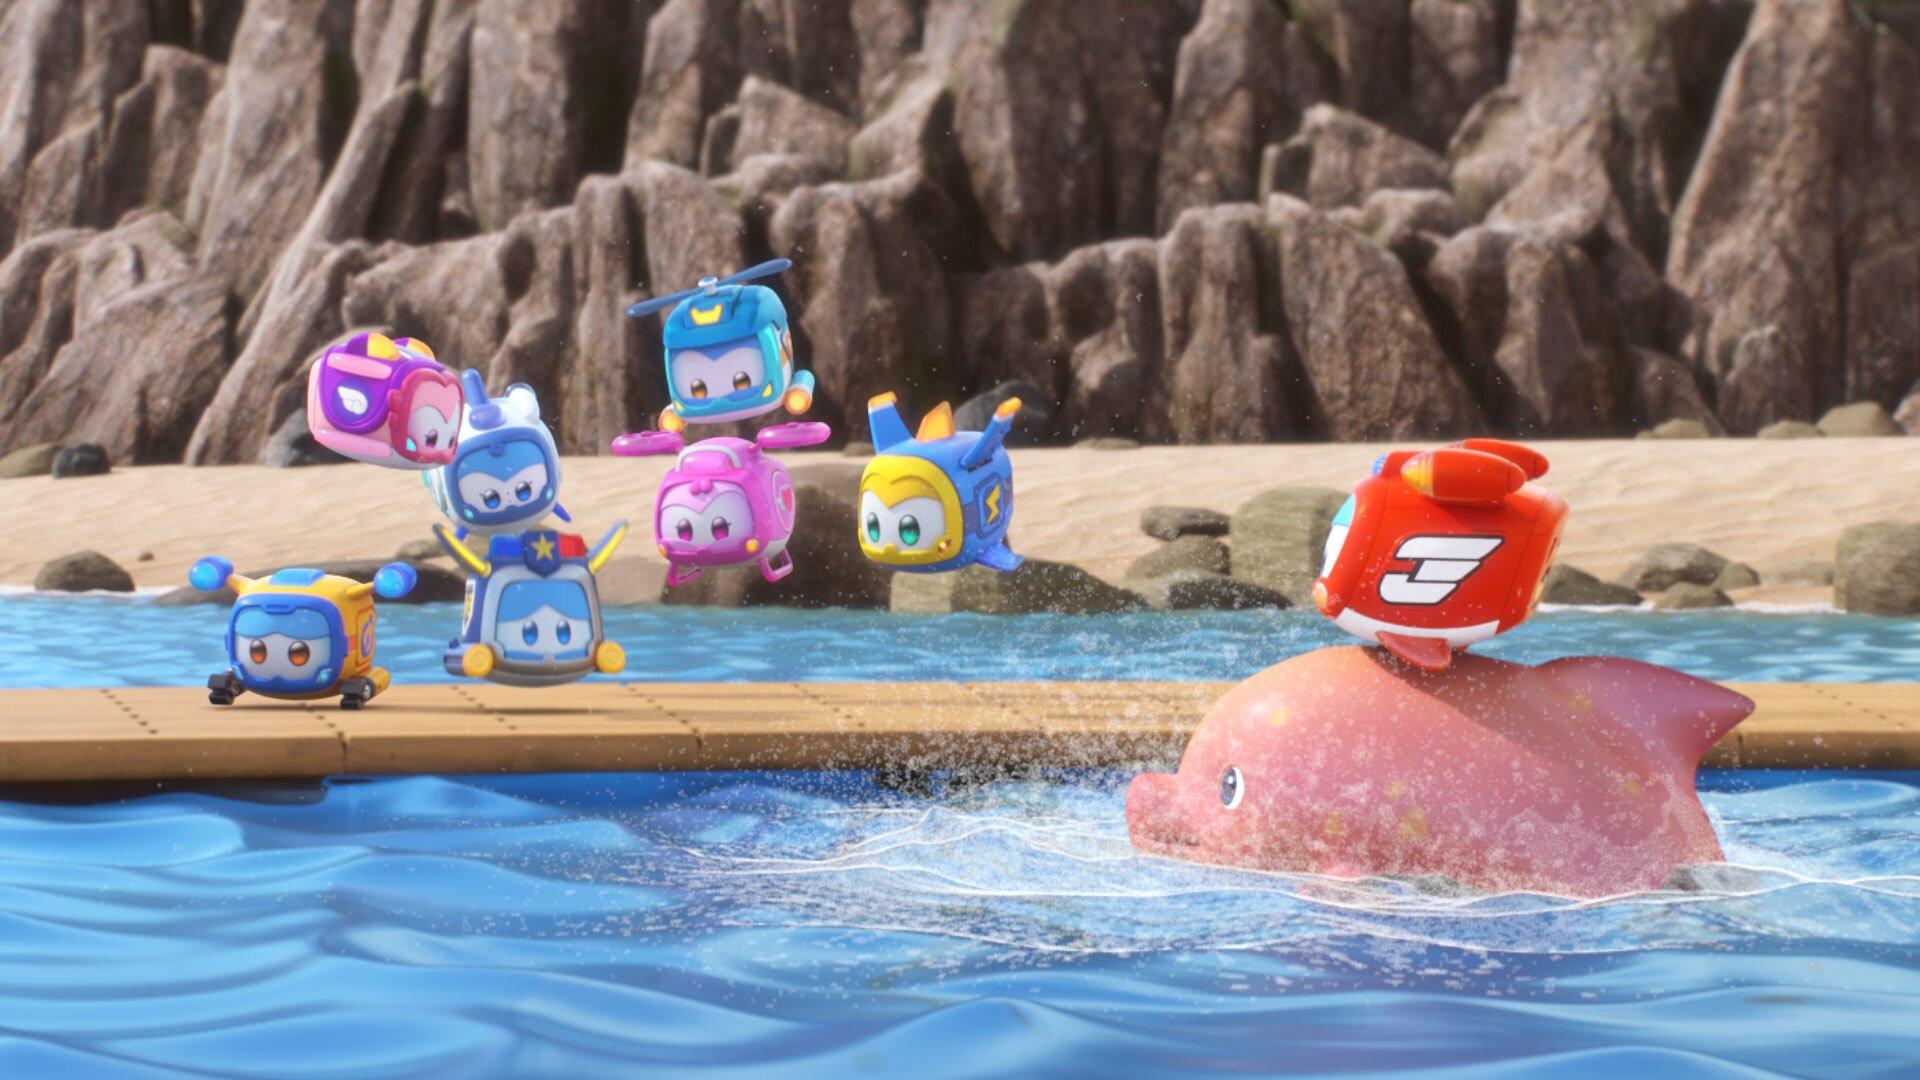 S7 Ep2 - Super Wings!